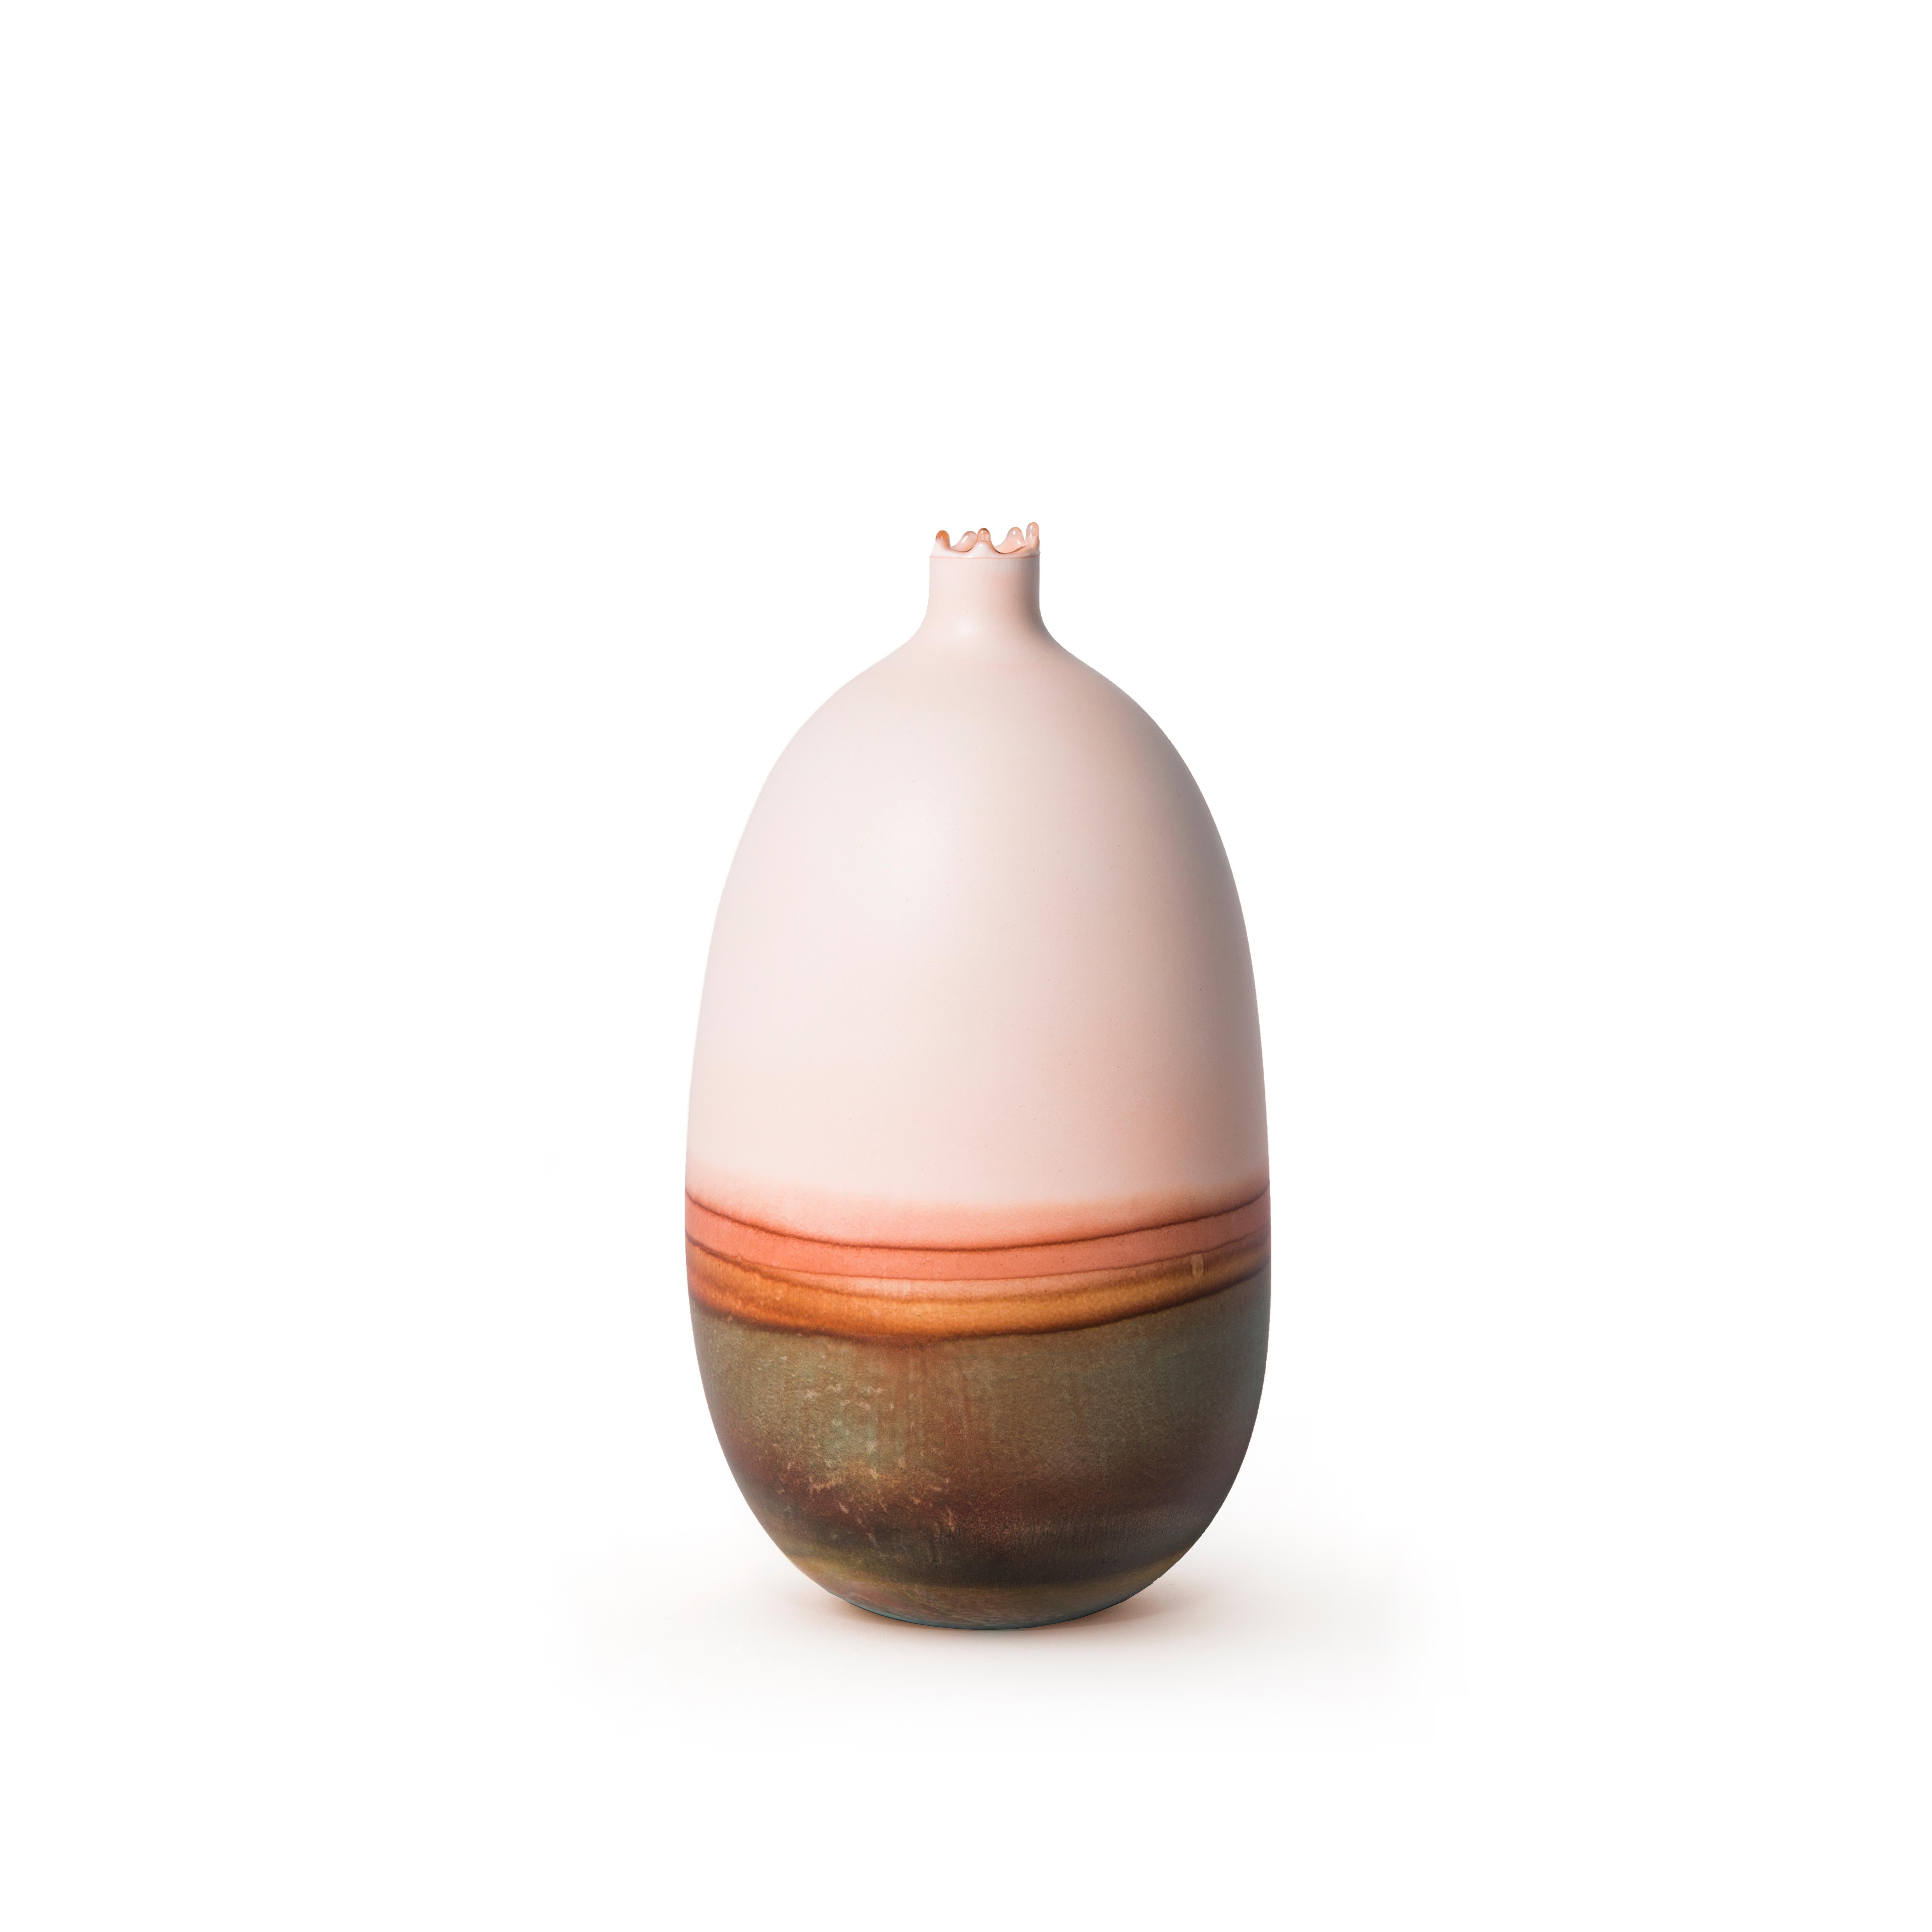 Peach Oxide Mercury vase by Elyse Graham
Dimensions: W 14 x D 14 x H 25.5cm
Materials: Plaster, Resin
Molded, dyed, and finished by hand in LA. customization
Available.
All pieces are made to order

This collection of vessels is inspired by